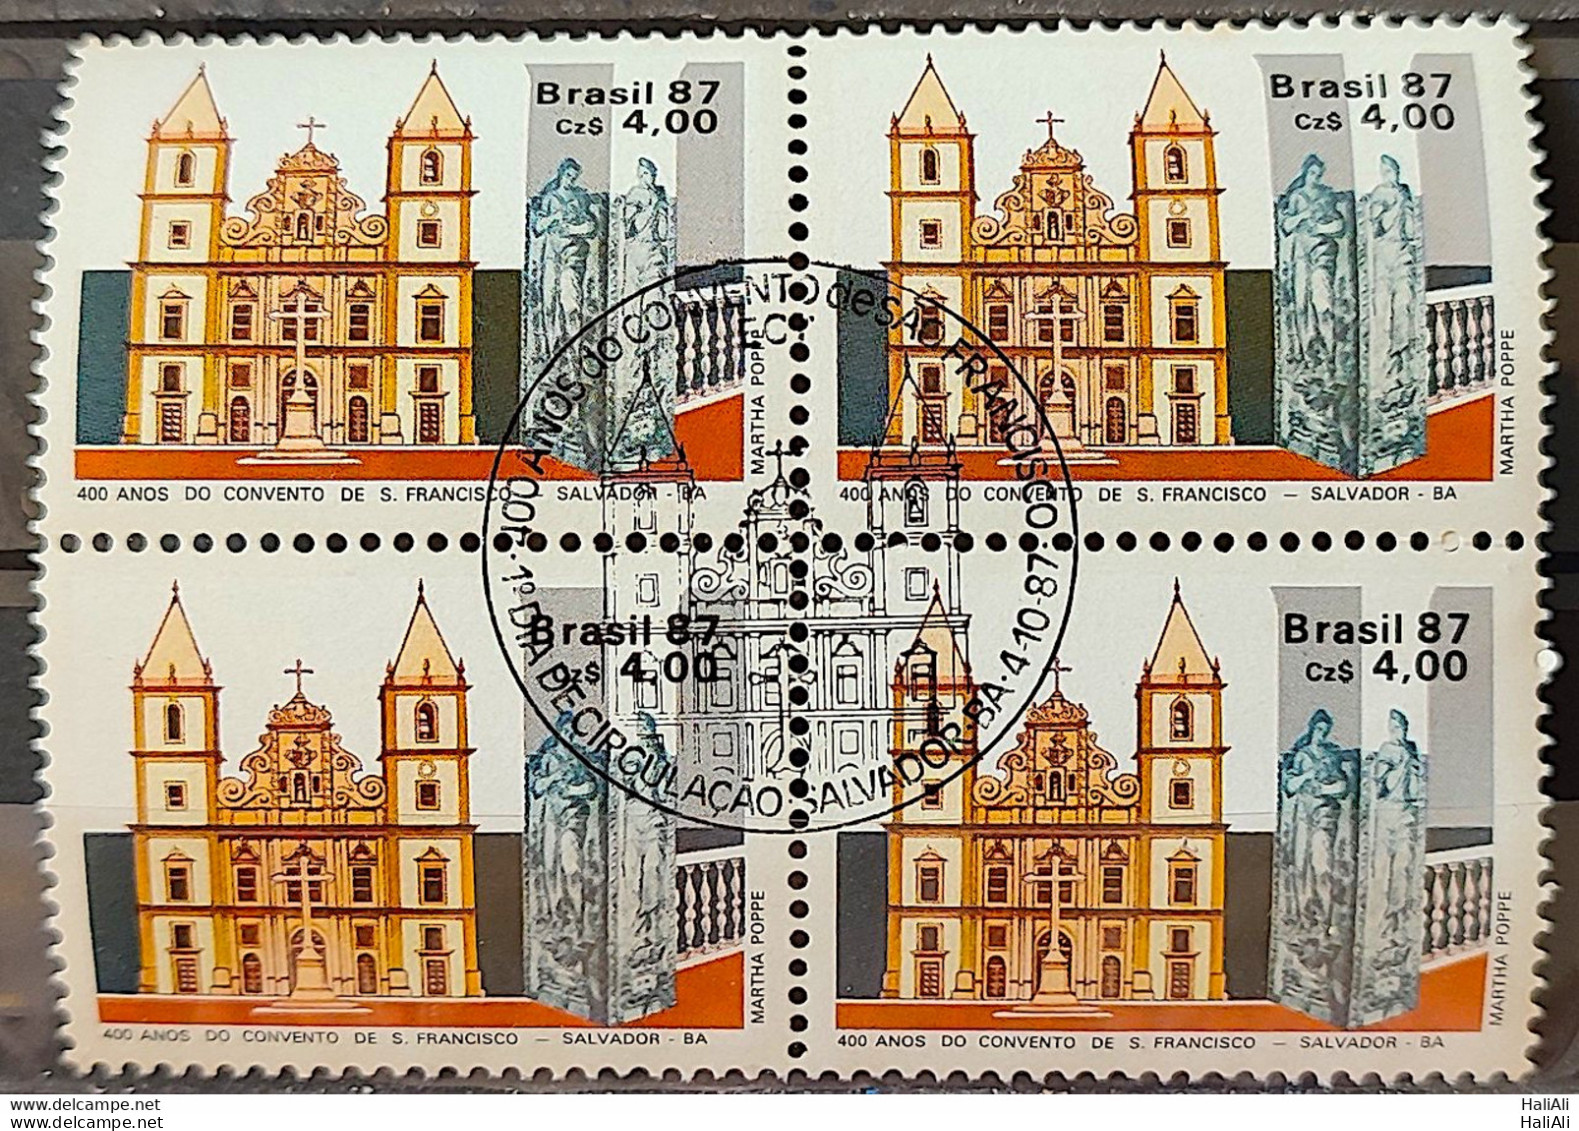 C 1563 Brazil Stamp 400 Years Convent Of Sao Francisco Salvador Bahia Religion Church 1987 Block Of 4 CBC BA 2 - Unused Stamps